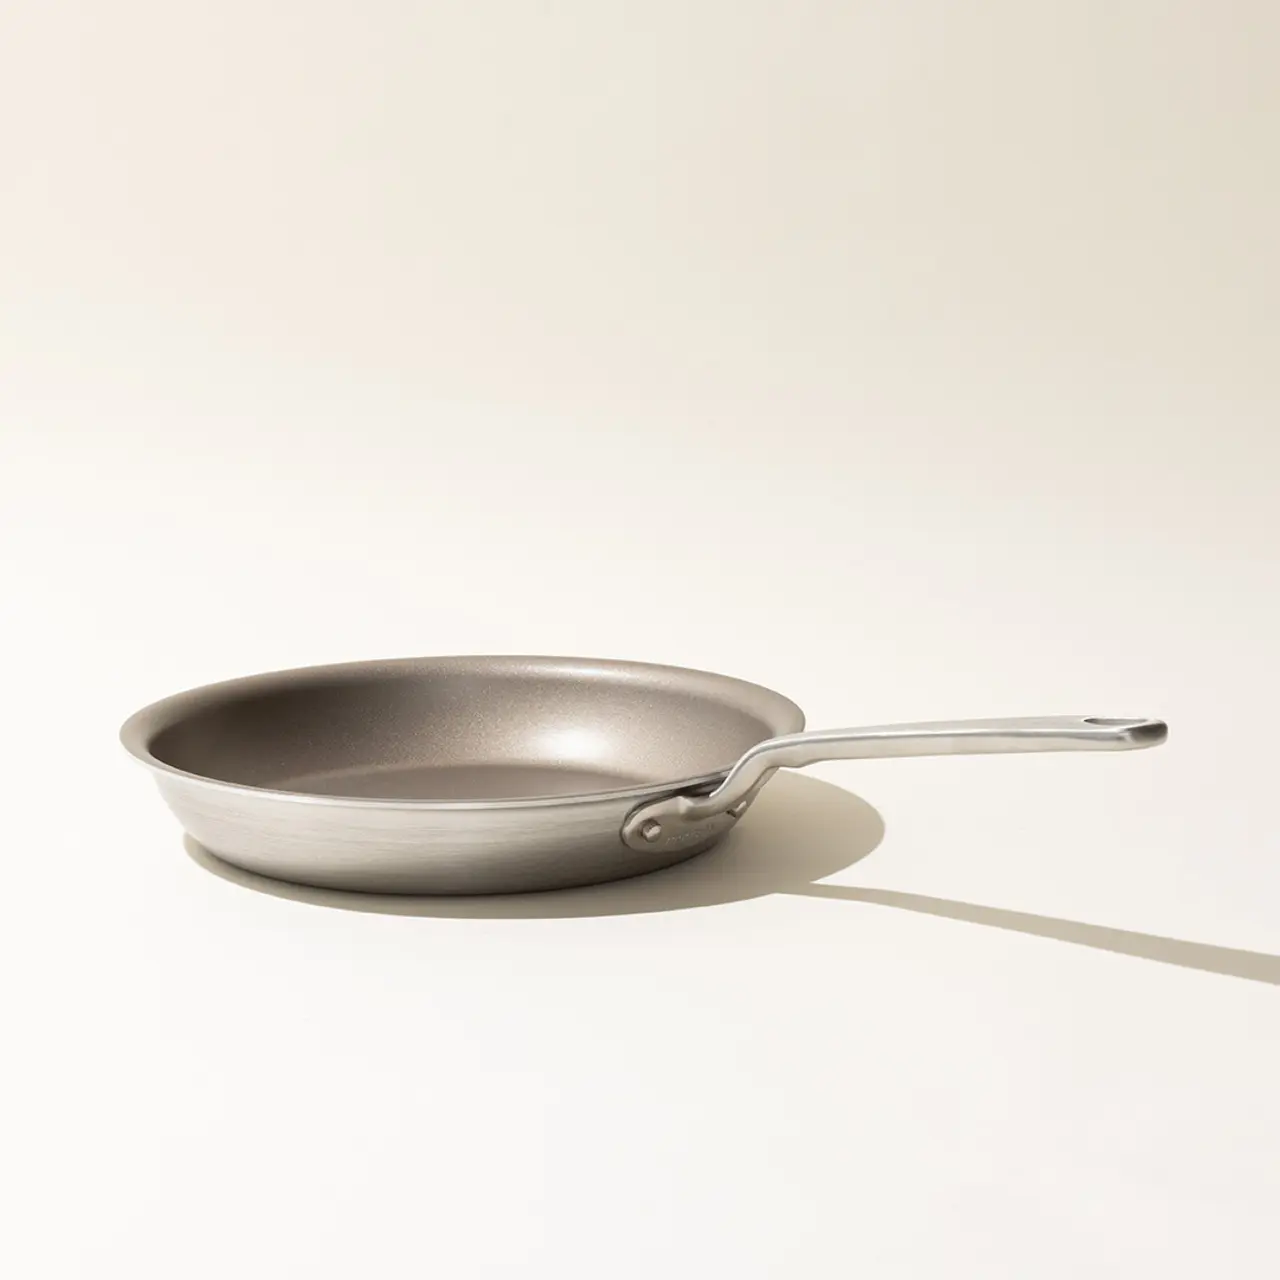 A frying pan with a metal handle on a plain background, casting a soft shadow to the right.